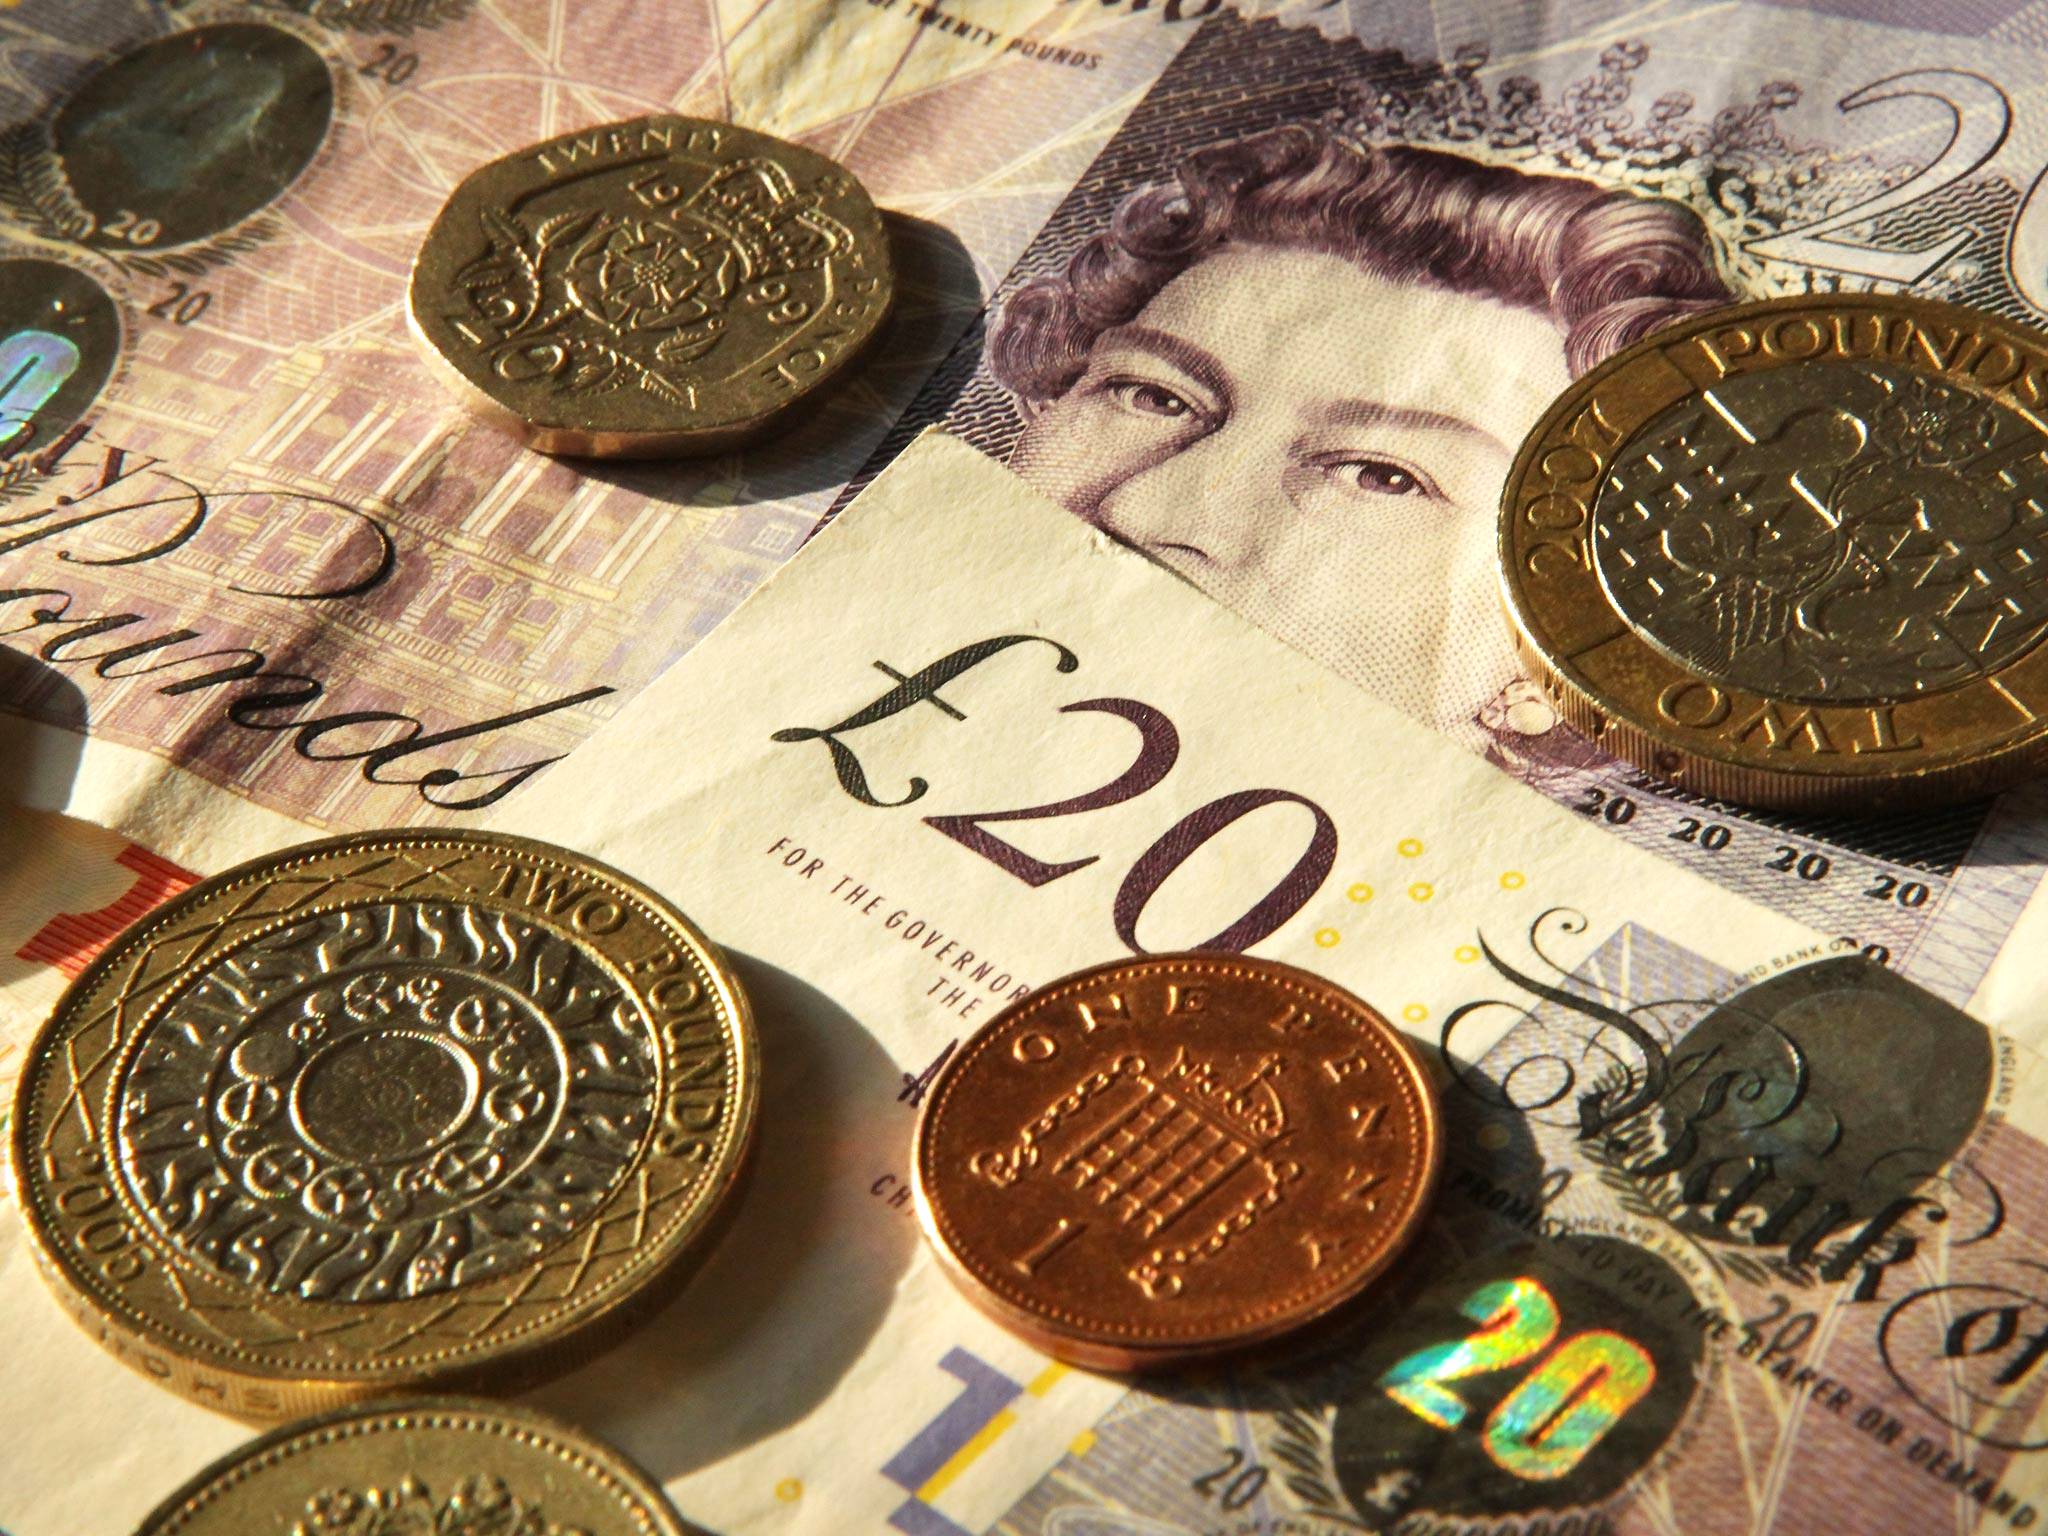 The Low Pay Commission is calling for an overhaul of the national minimum wage